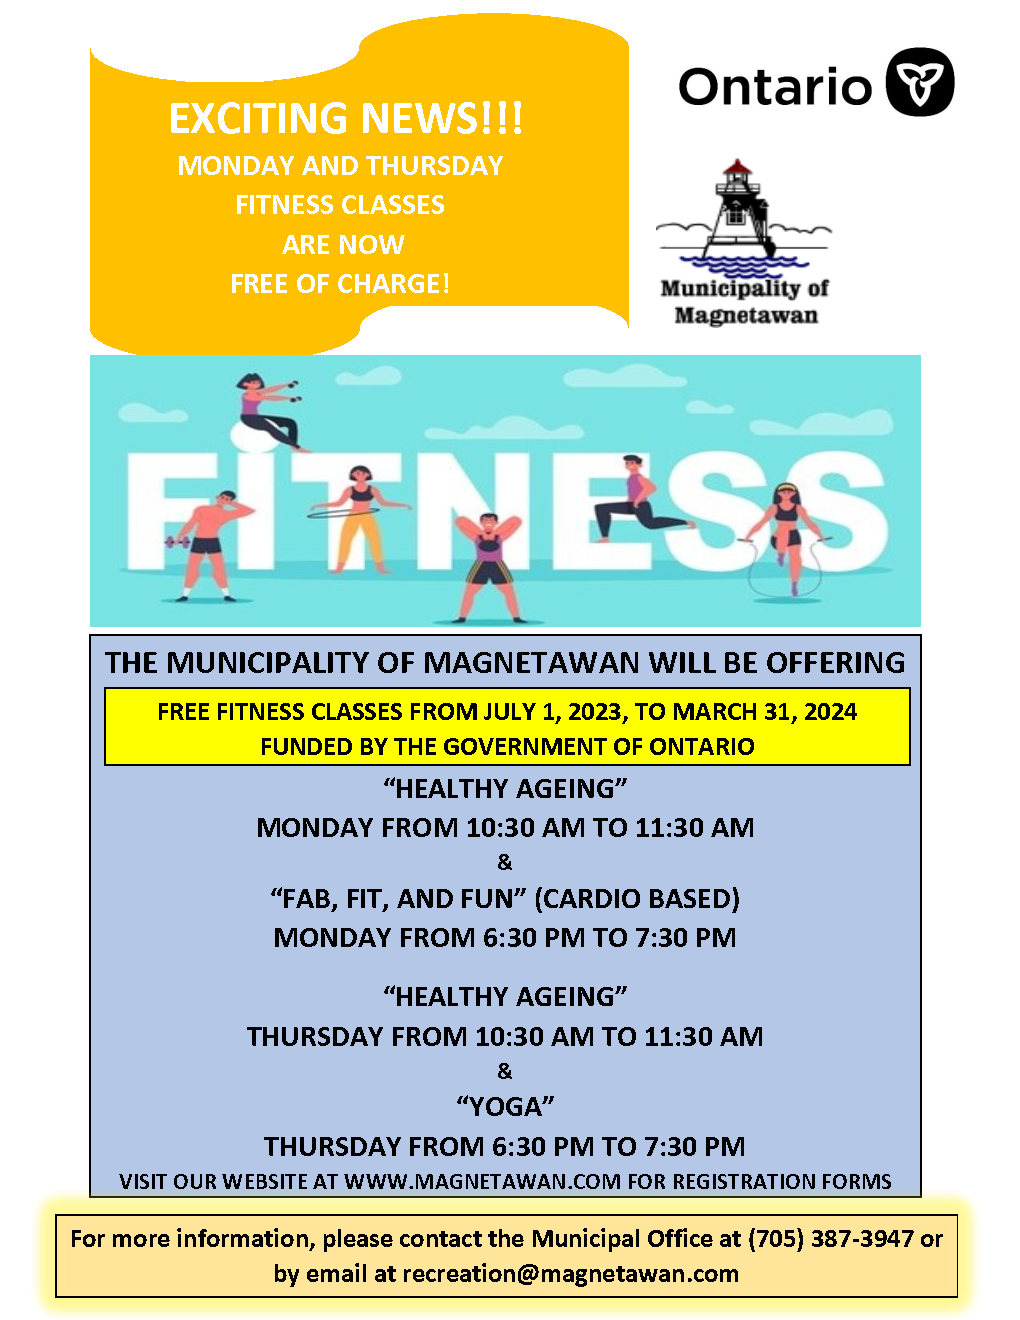 free-fitness-classes-mnday-and-thursday.jpg